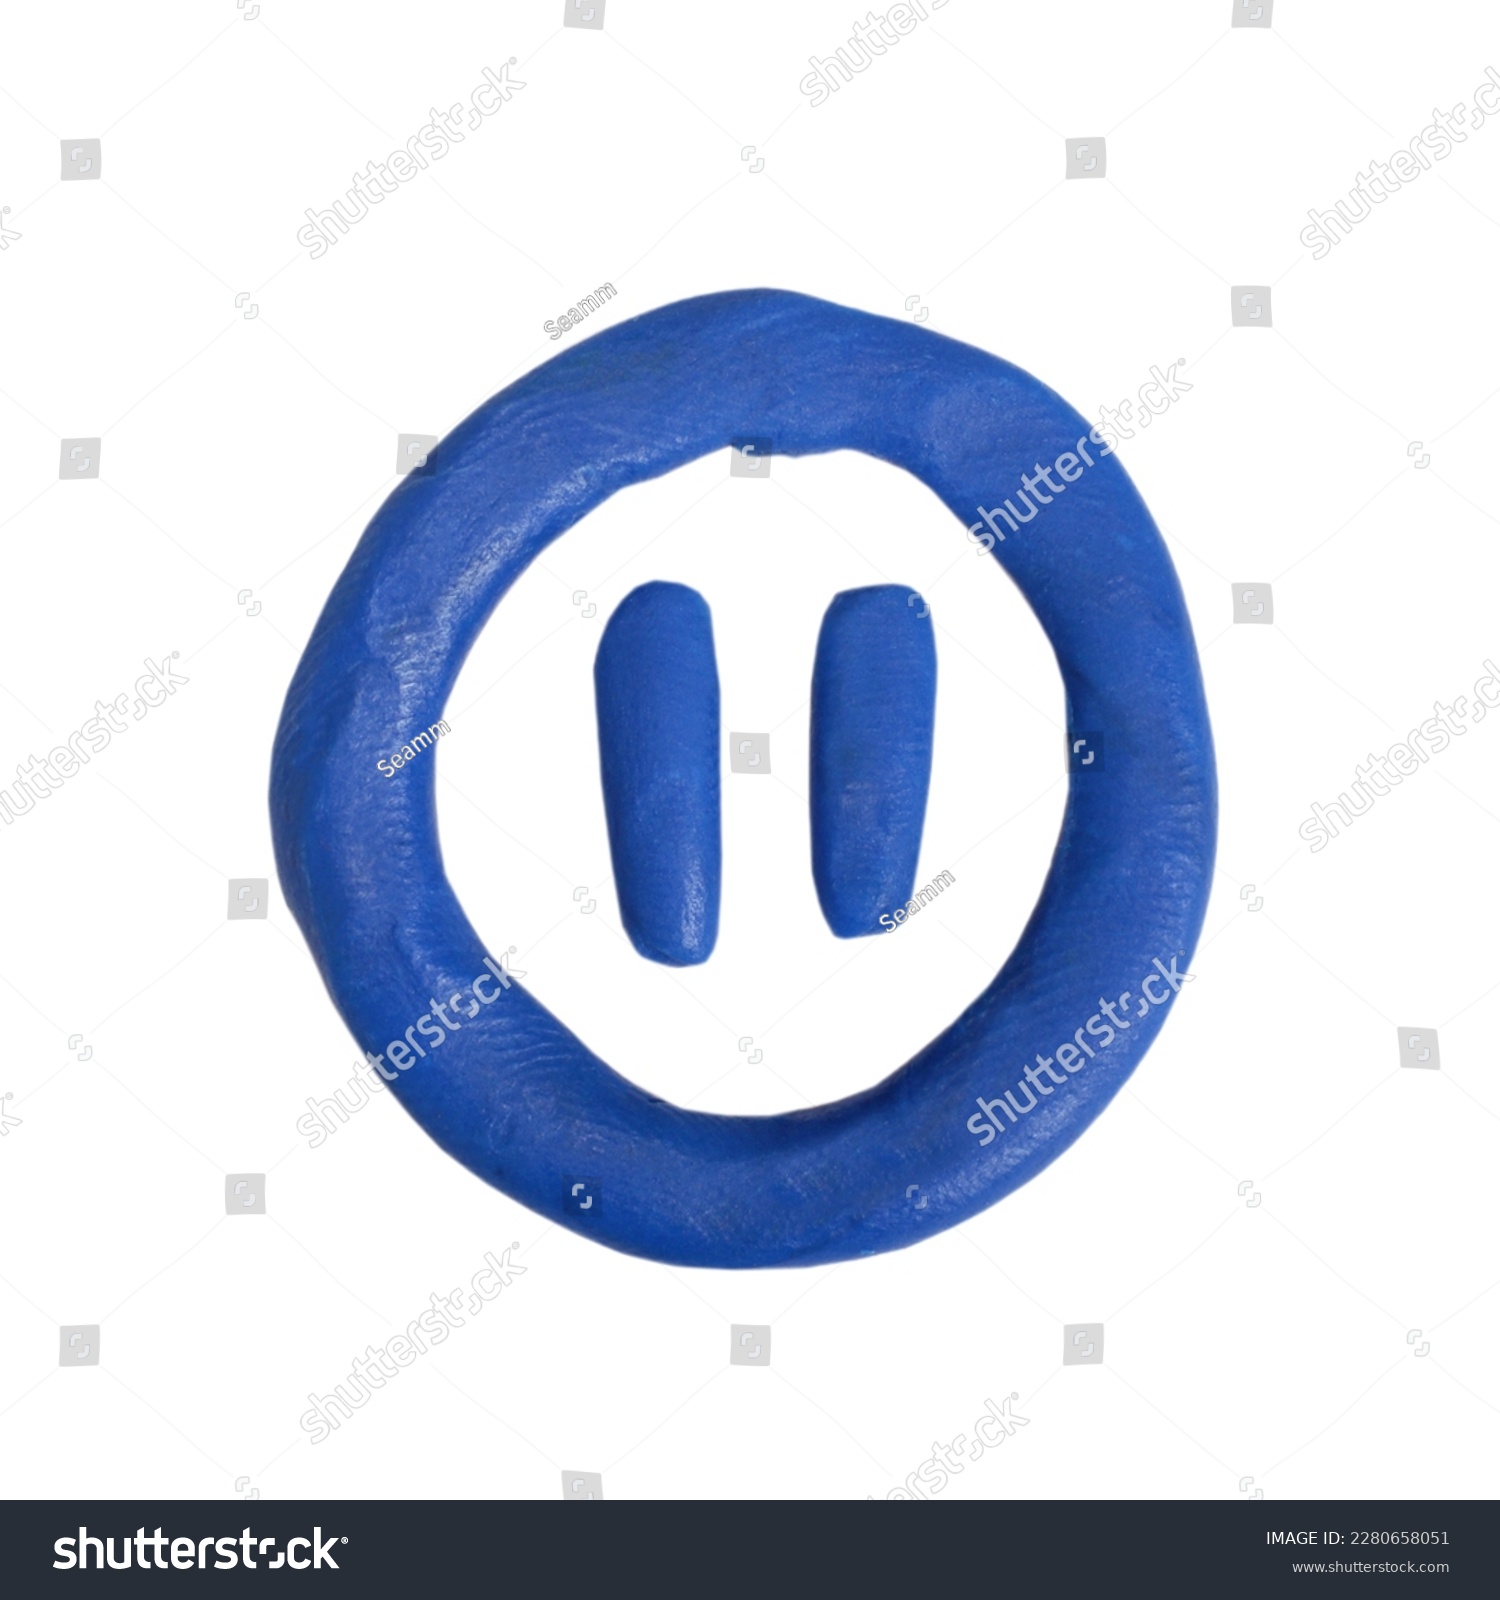 Pause button logo plasticine icon isolated on white background #2280658051